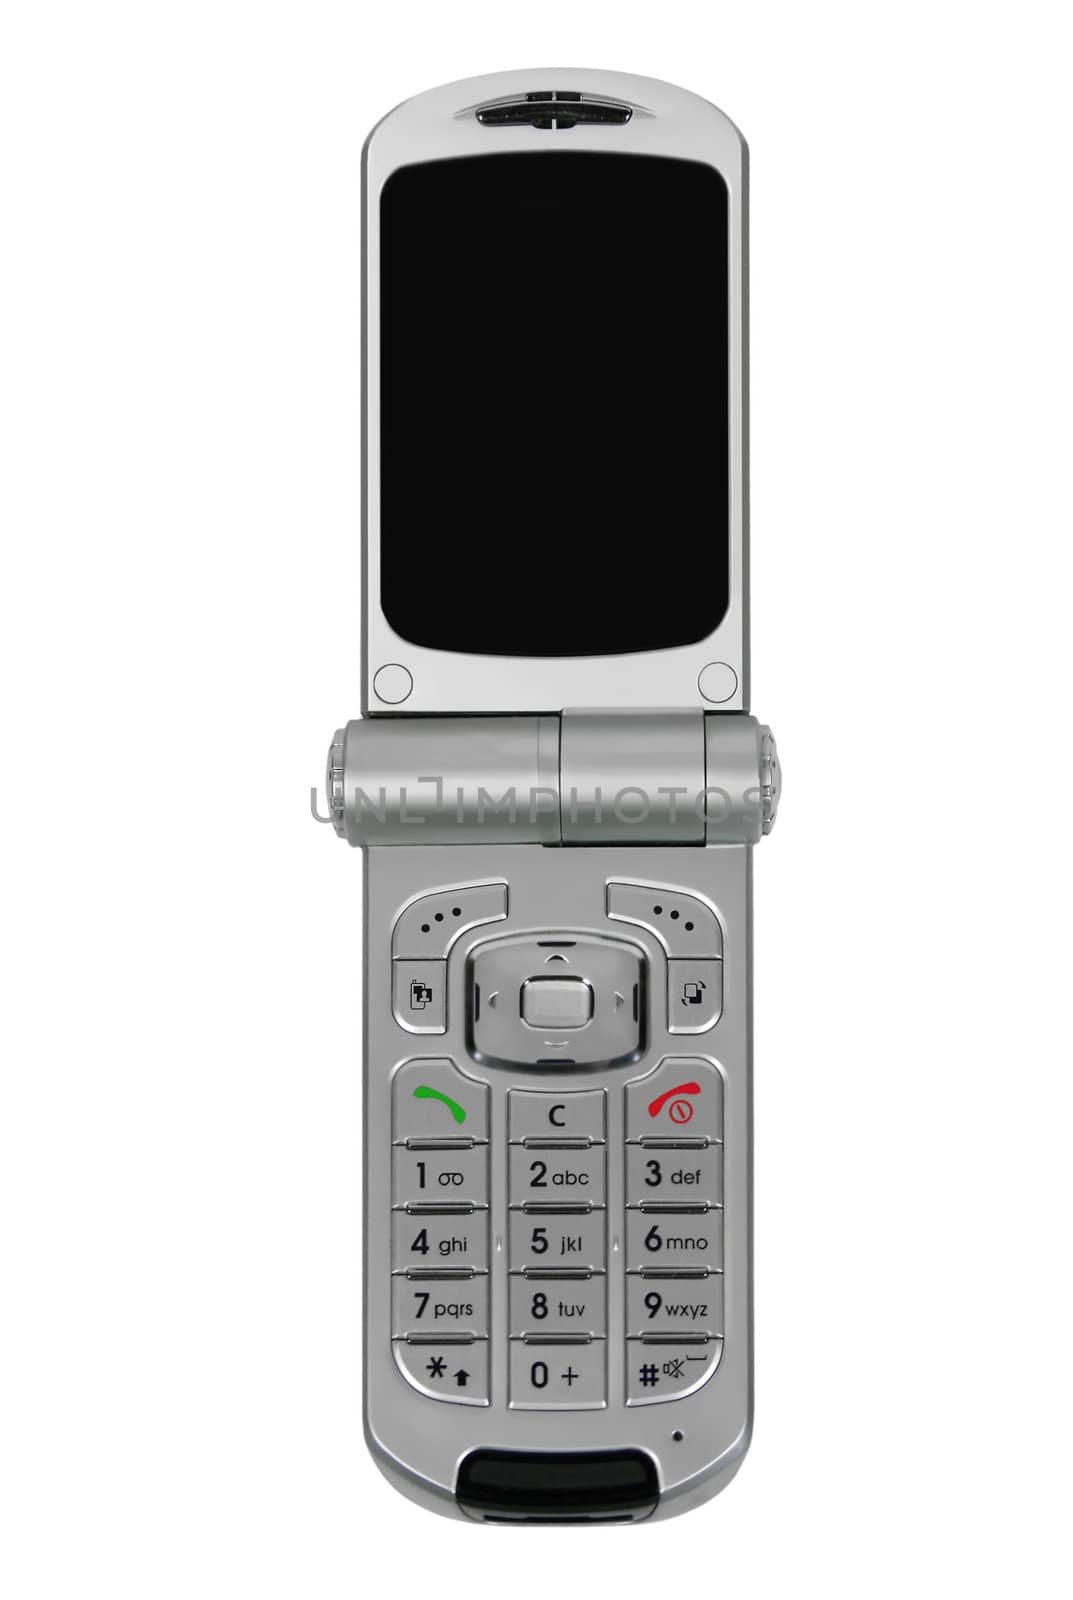 Mobile Phone by Ragnar